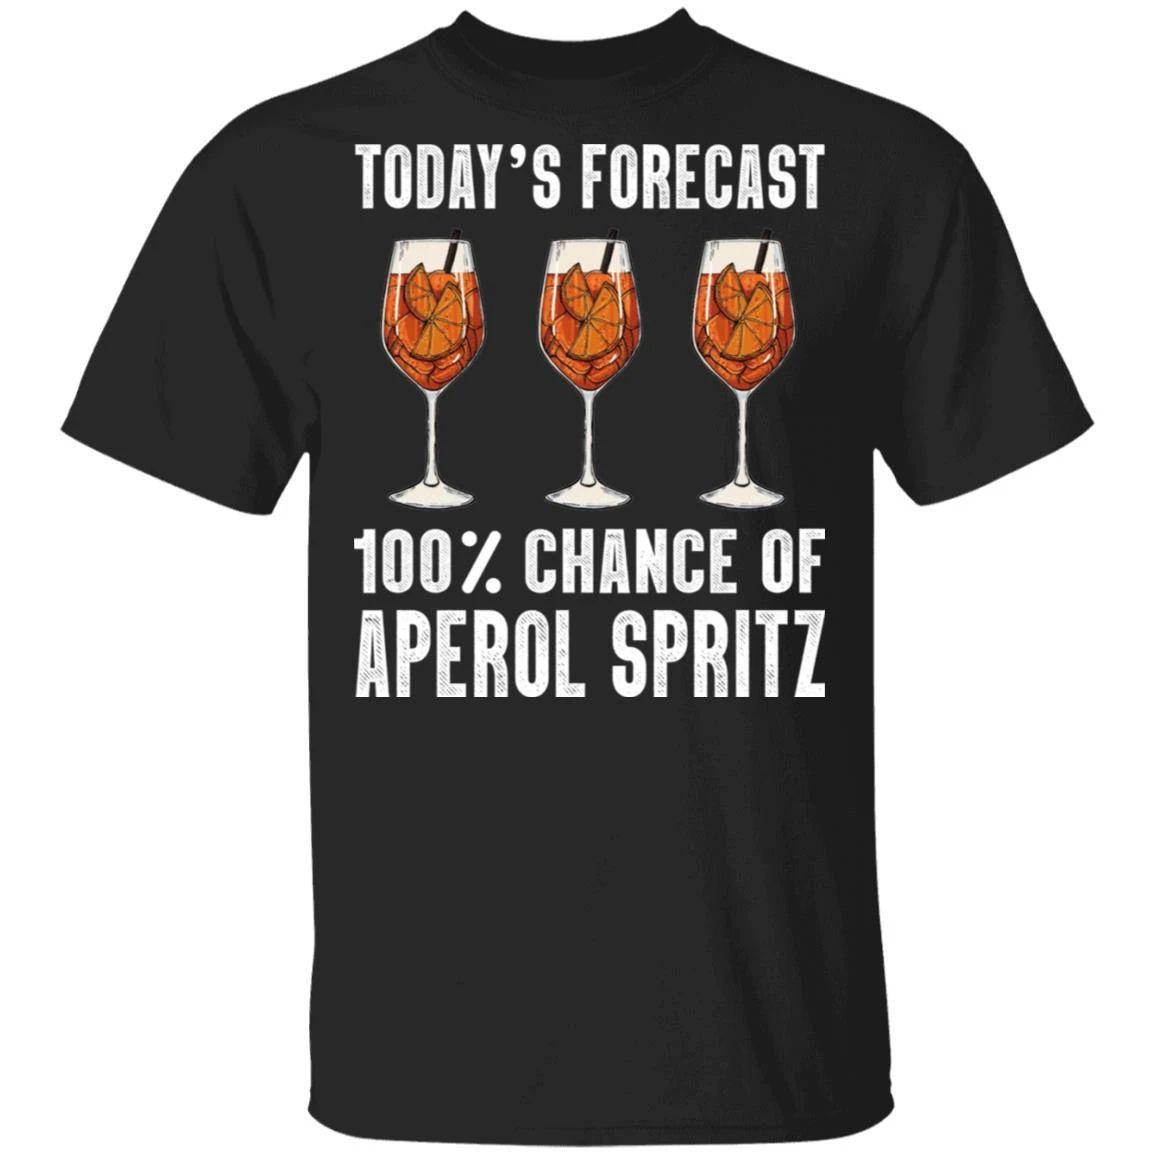 Today’s Forecast 100% Aperol Spritz T-shirt Cocktail Tee